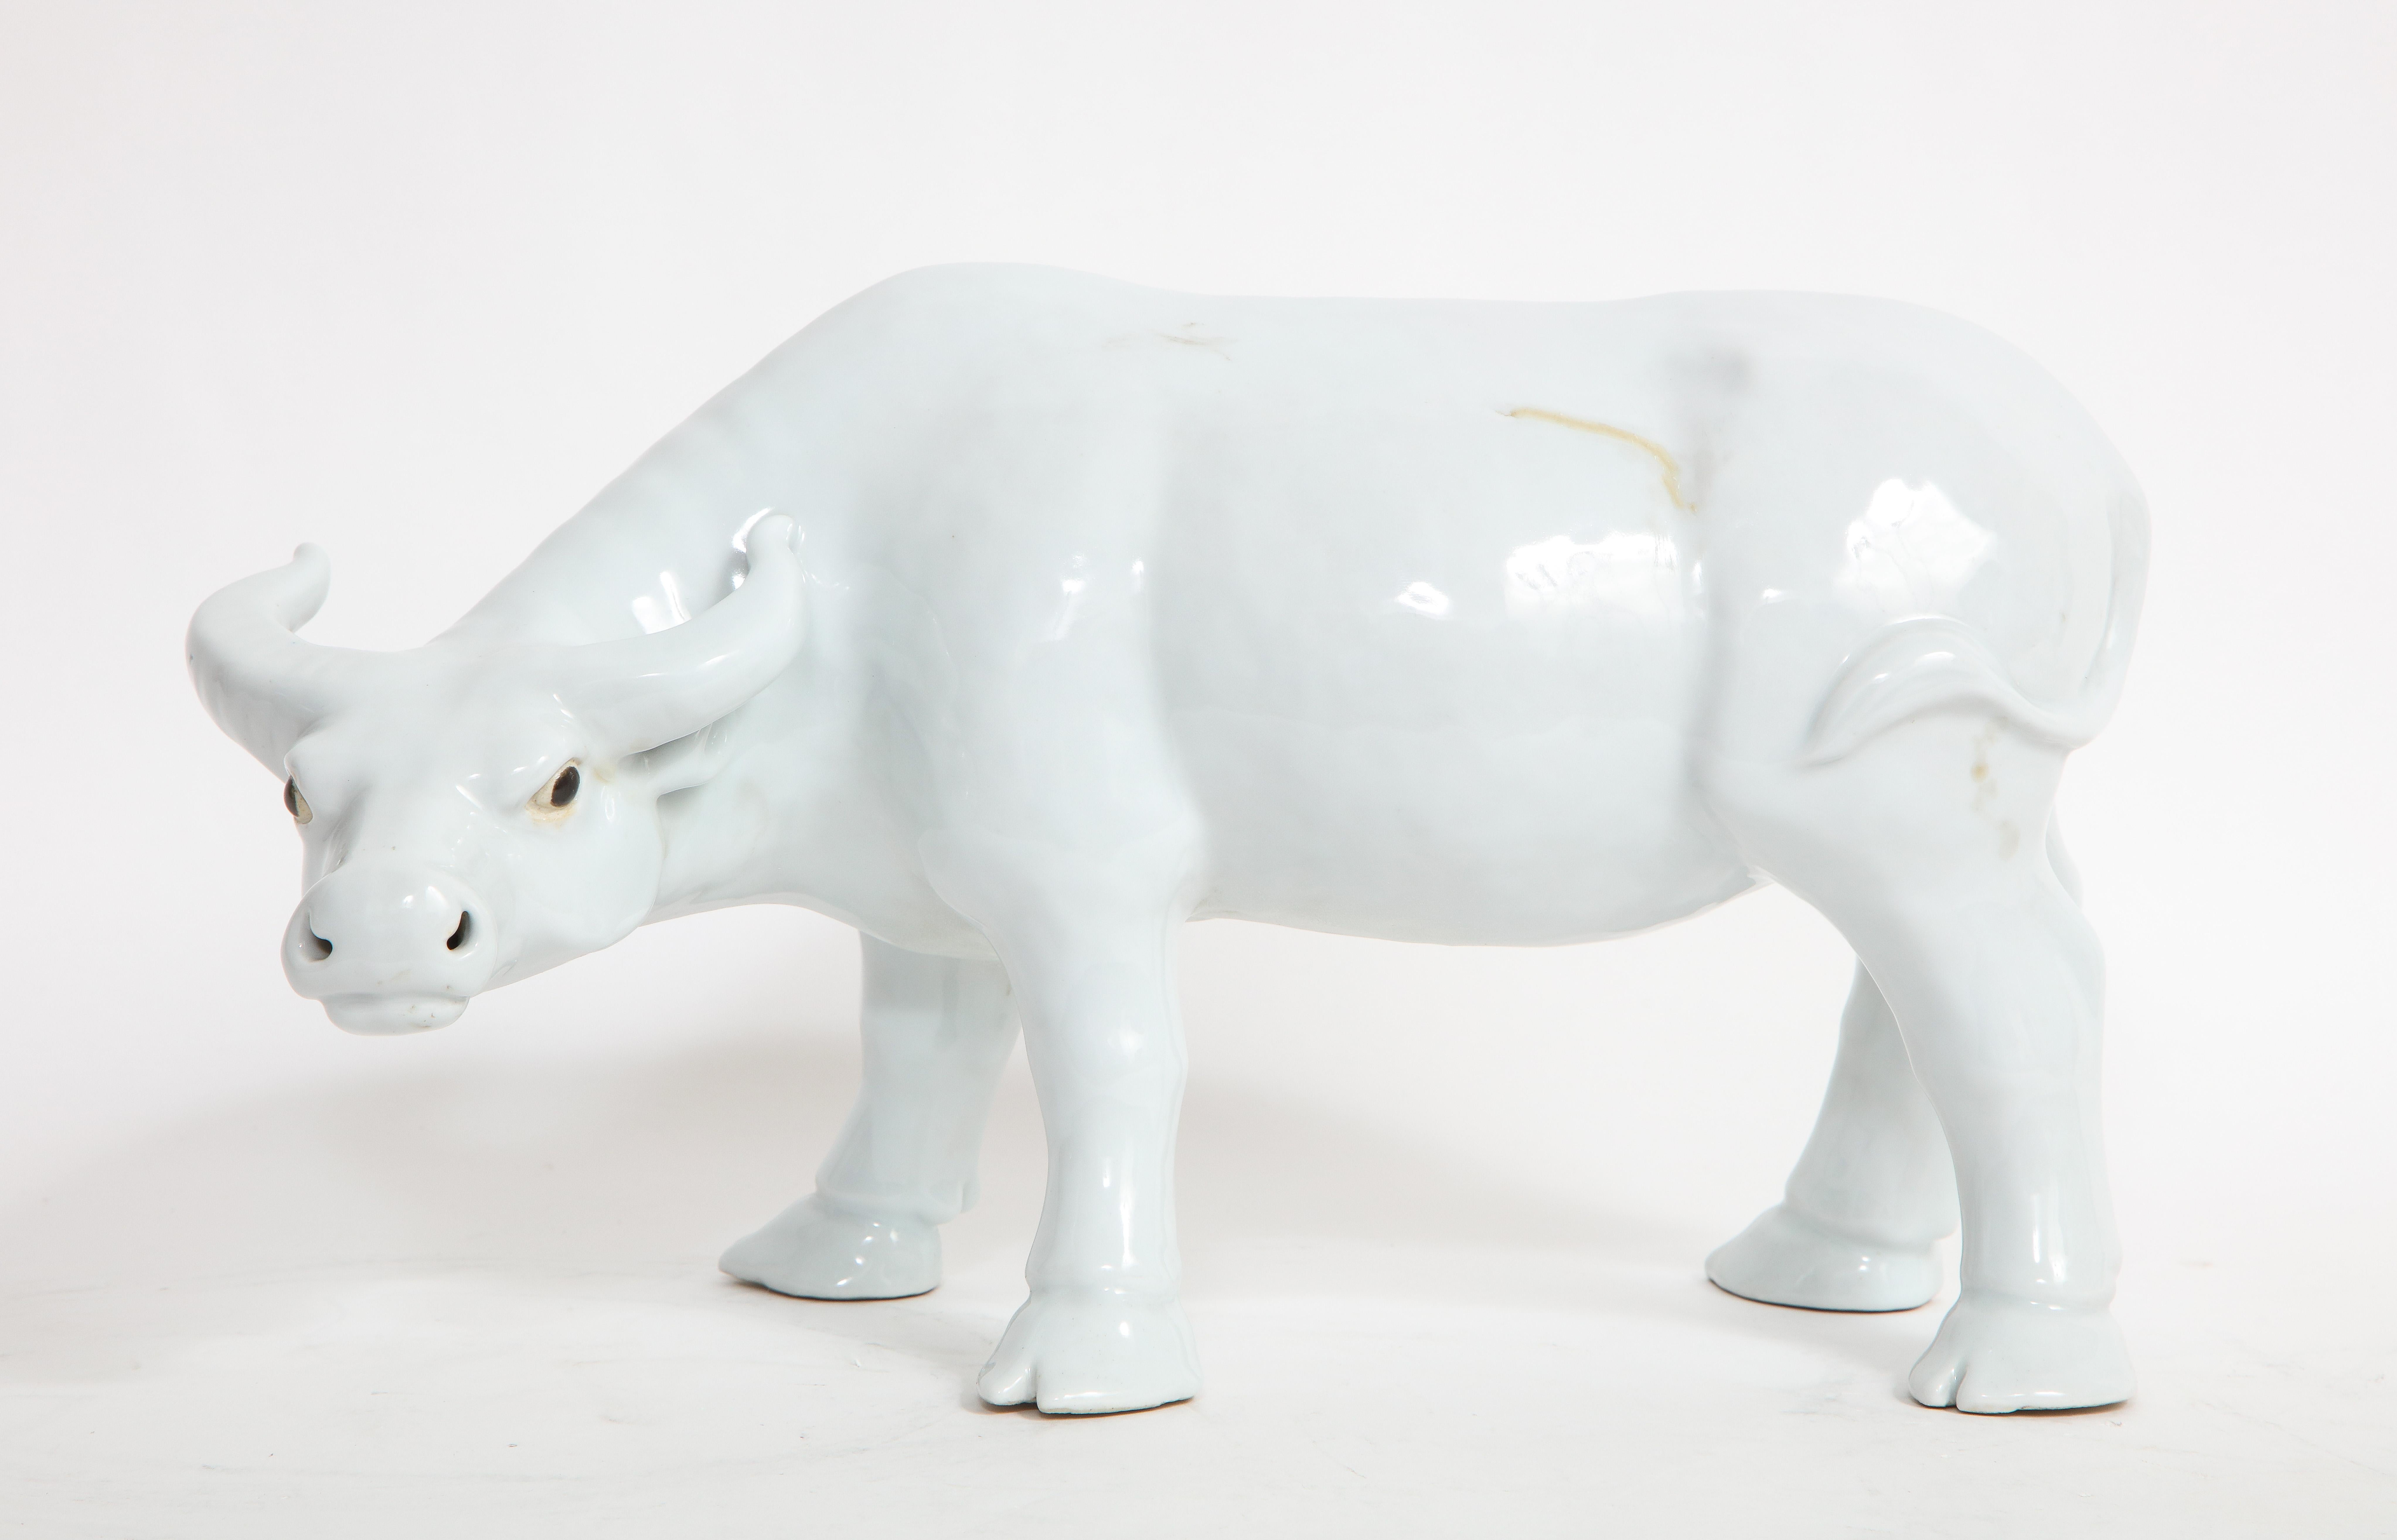 A Fantastic 19th Century Chinese Blanc De Chine Model of a Water Buffalo. Beautifully hand-carved and enameled with a bright white body and black enamel eyes. This piece is really superb and in fabulous condition for its age. In Chinese culture, the